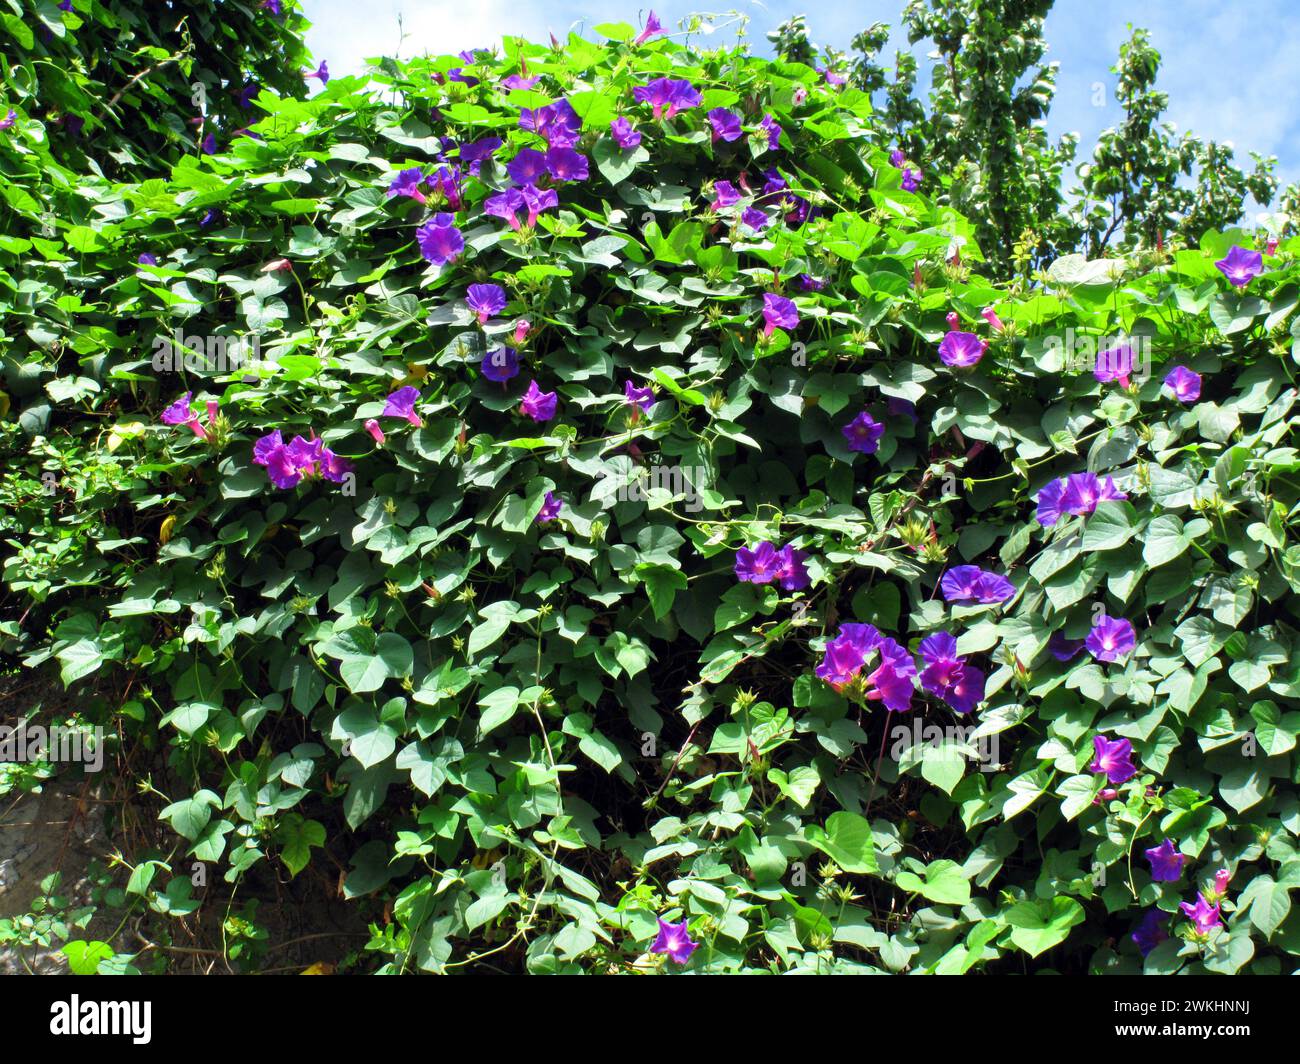 The invasive plant blue morning glory (Ipomoea indica) in flower. It is native to tropical regions of America. Stock Photo